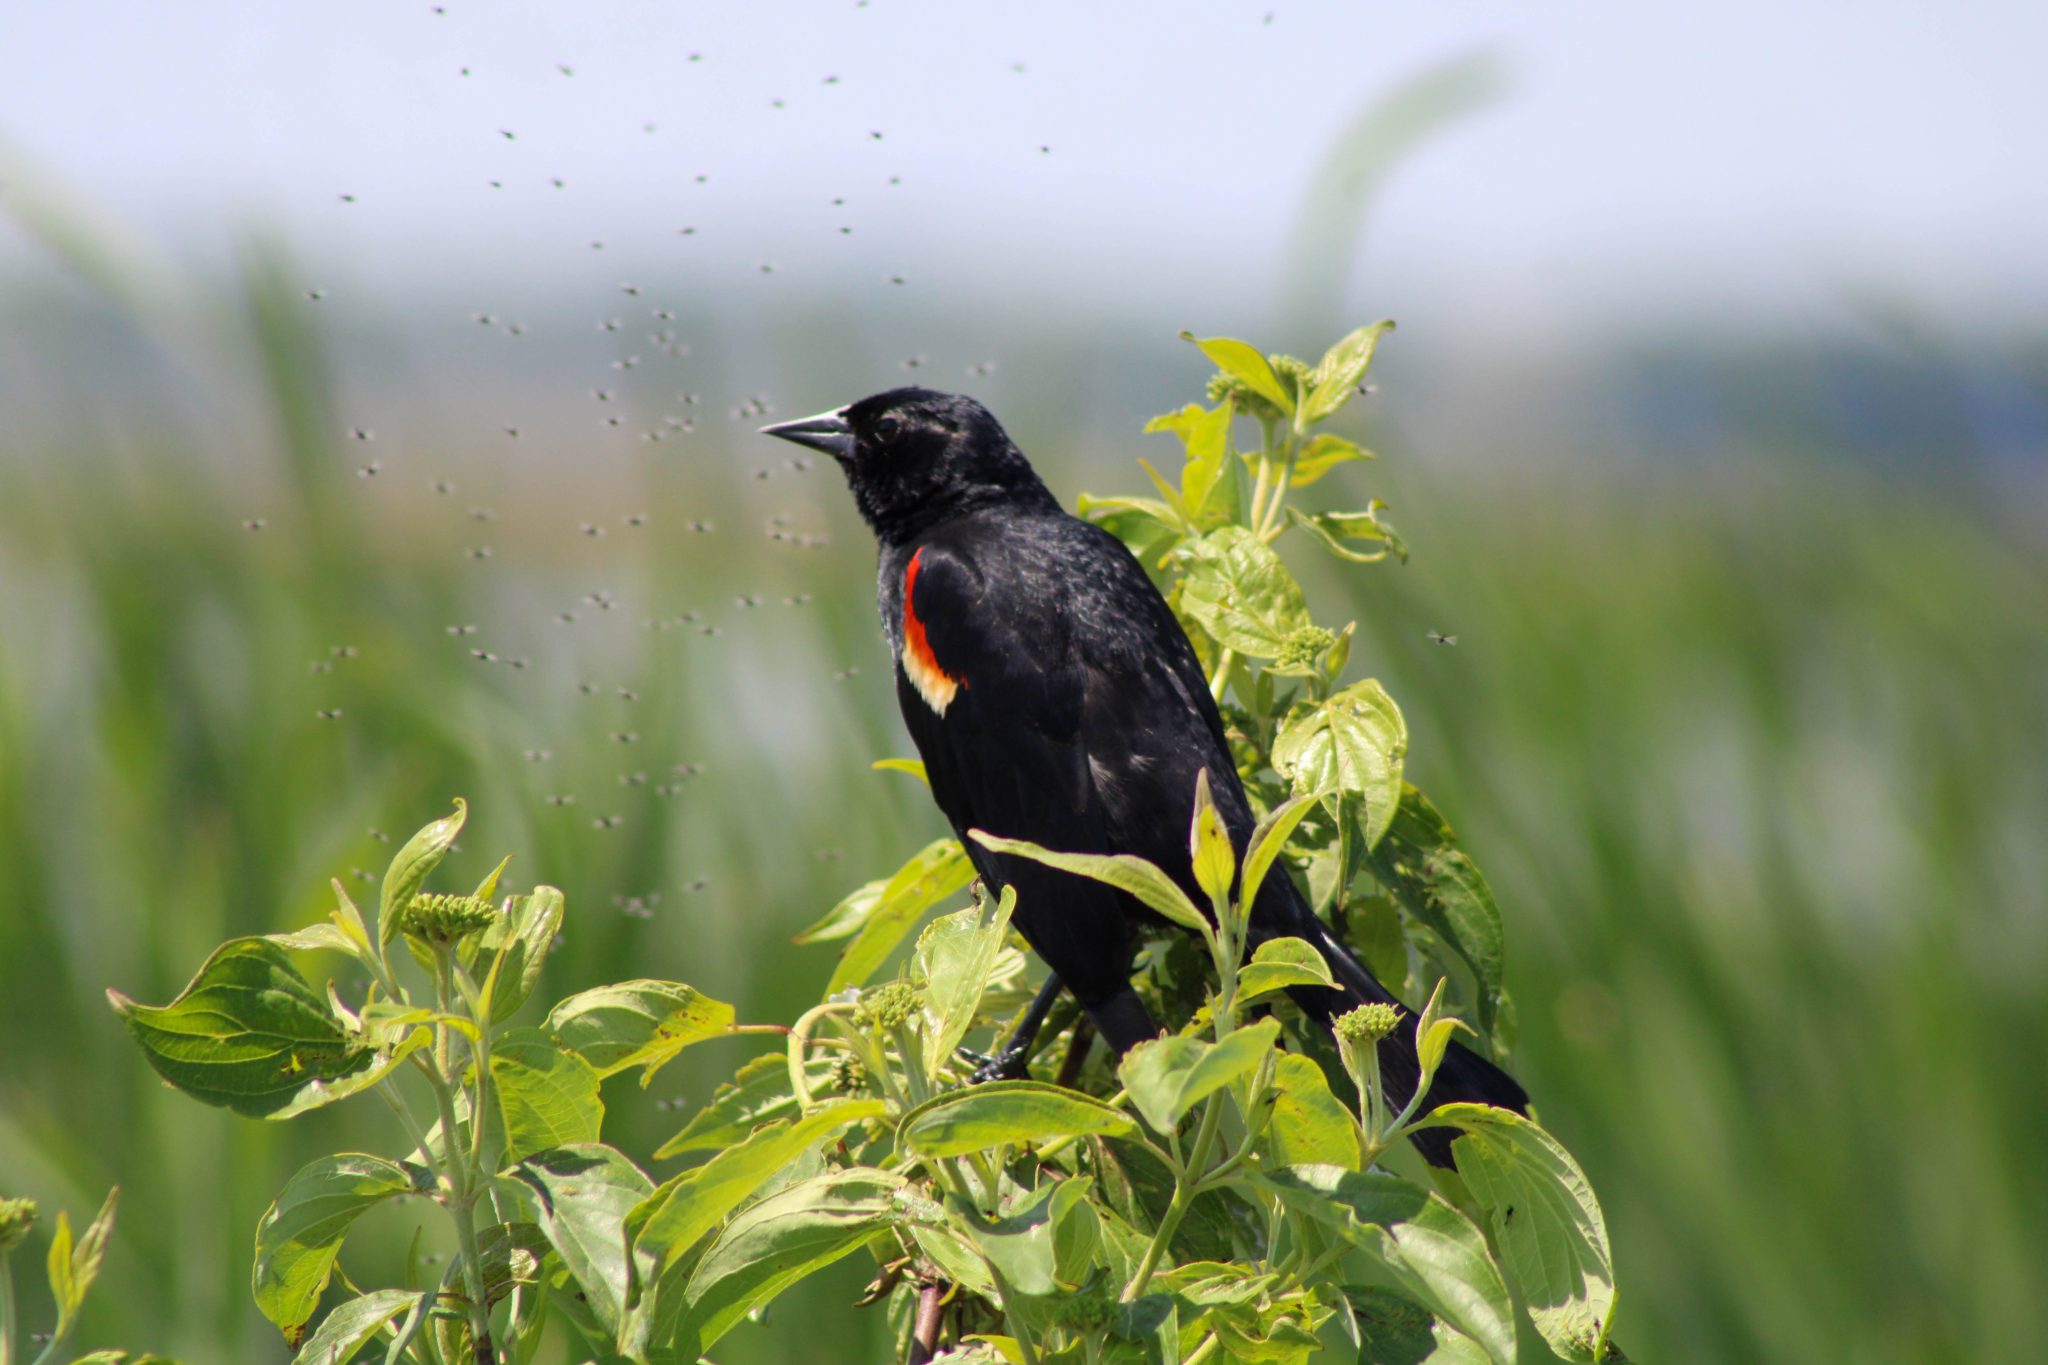 A redwing blackbird perched on a branch with insects flying around him.